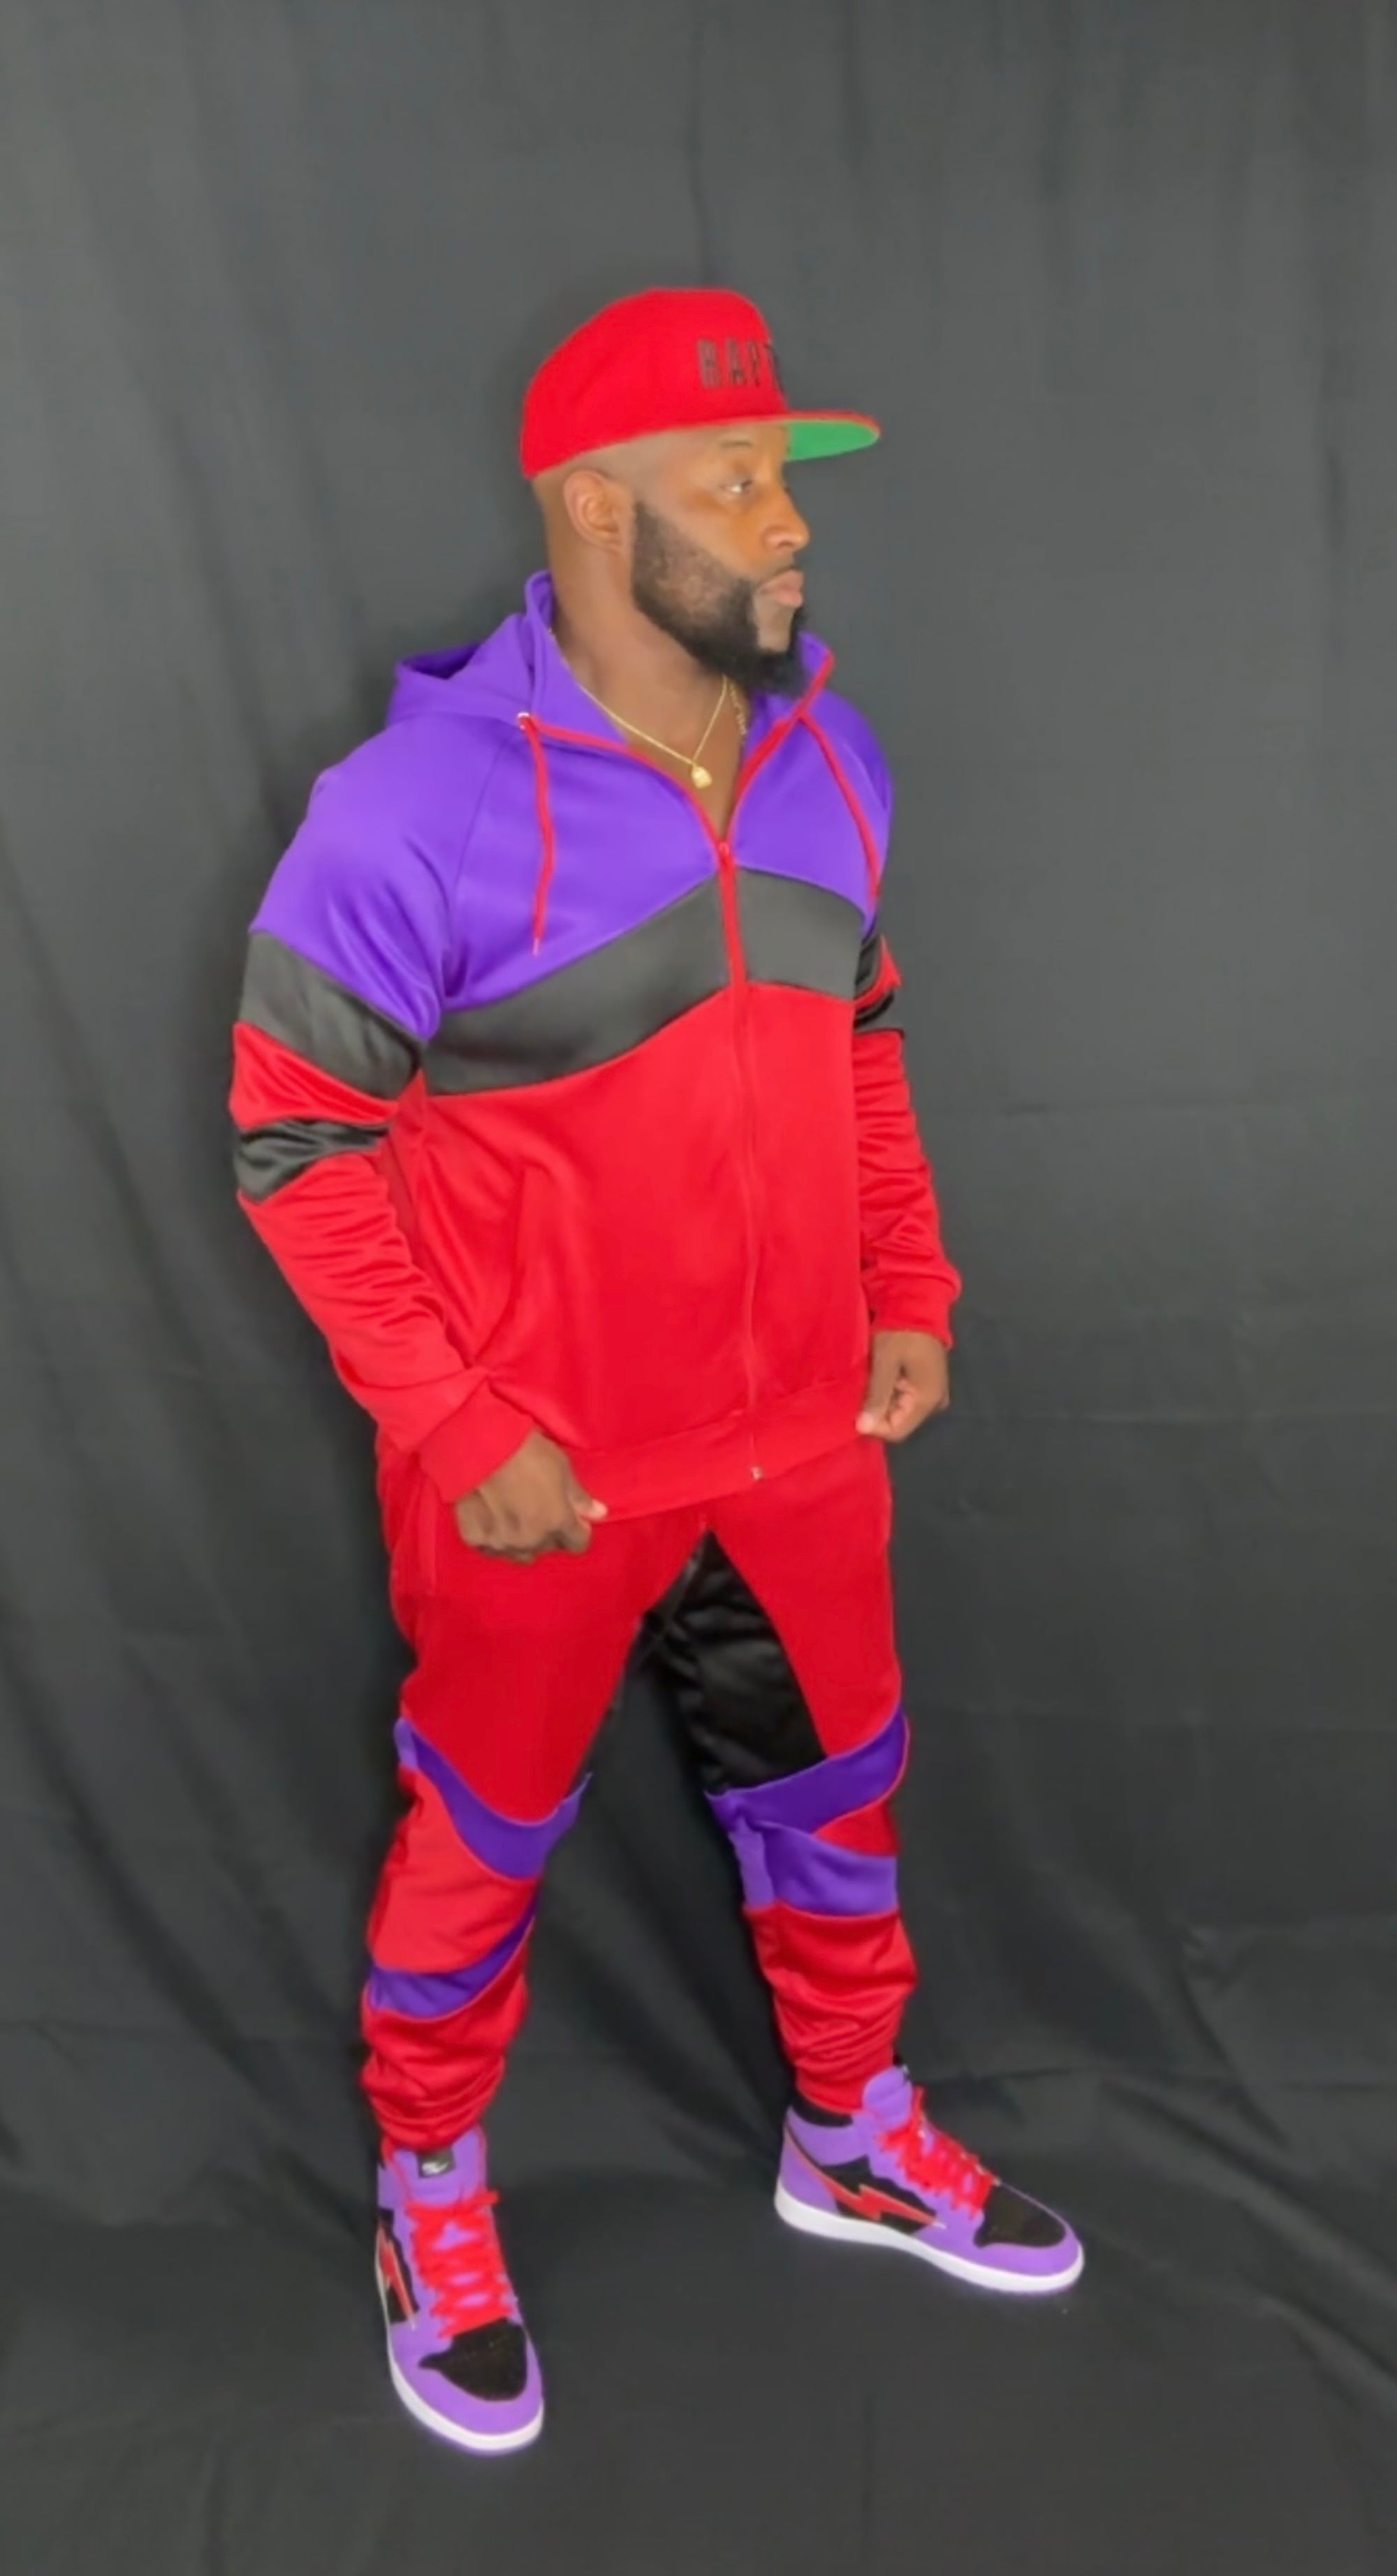 Preach Tracksuit Set Purple/Black/Red 100% Poly tricot